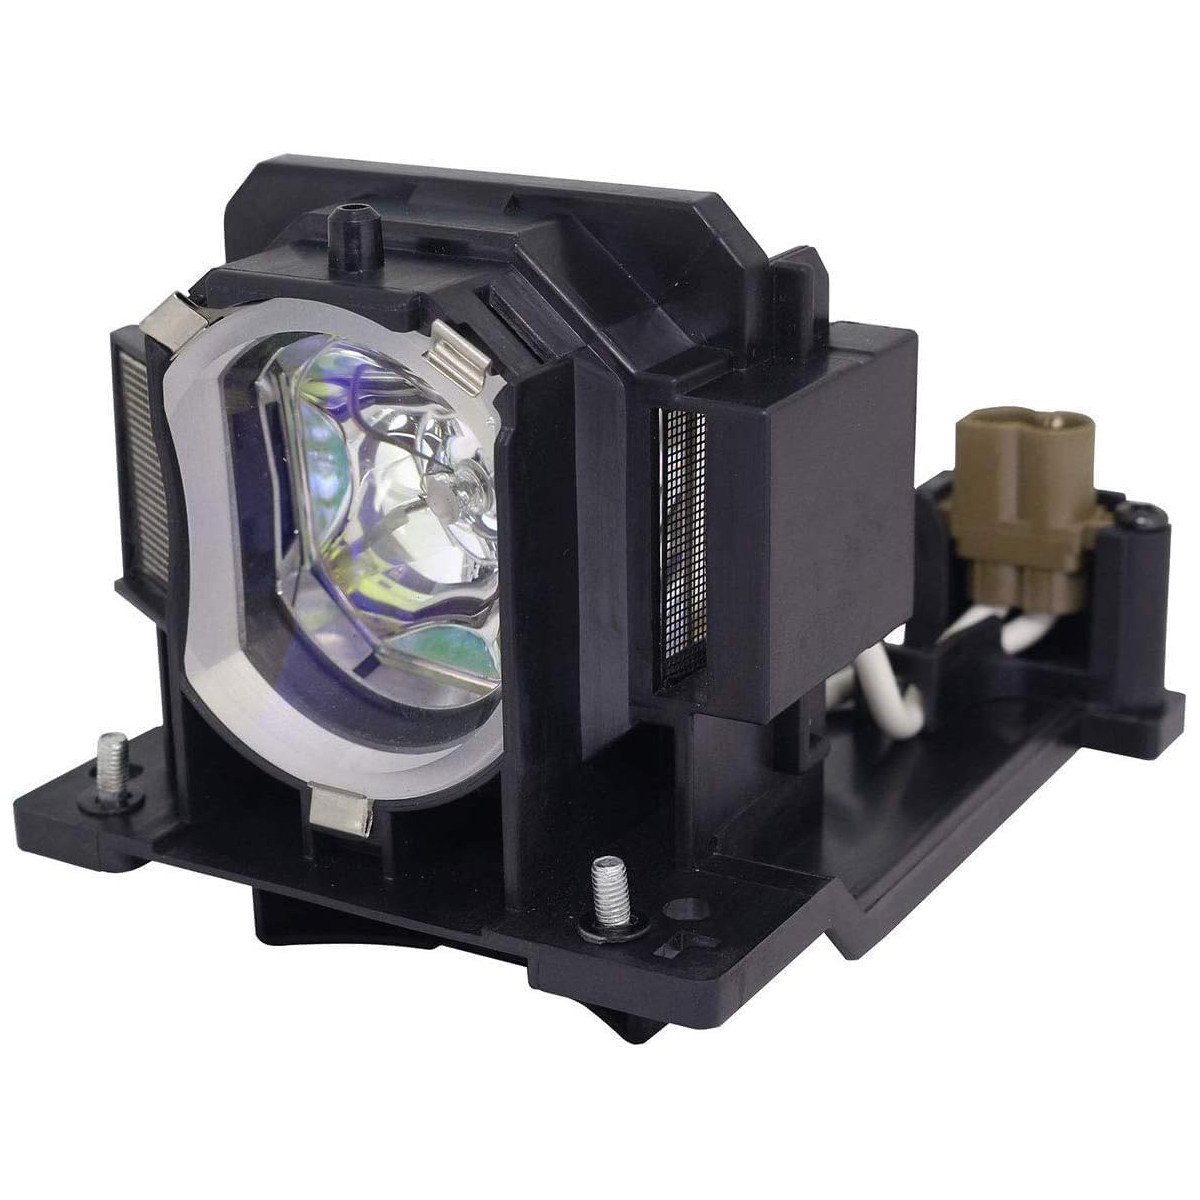 Replacement Projector lamp DT01091 For Hitachi CP-D10 CP-D30 CP -DW10 CP-DW10N